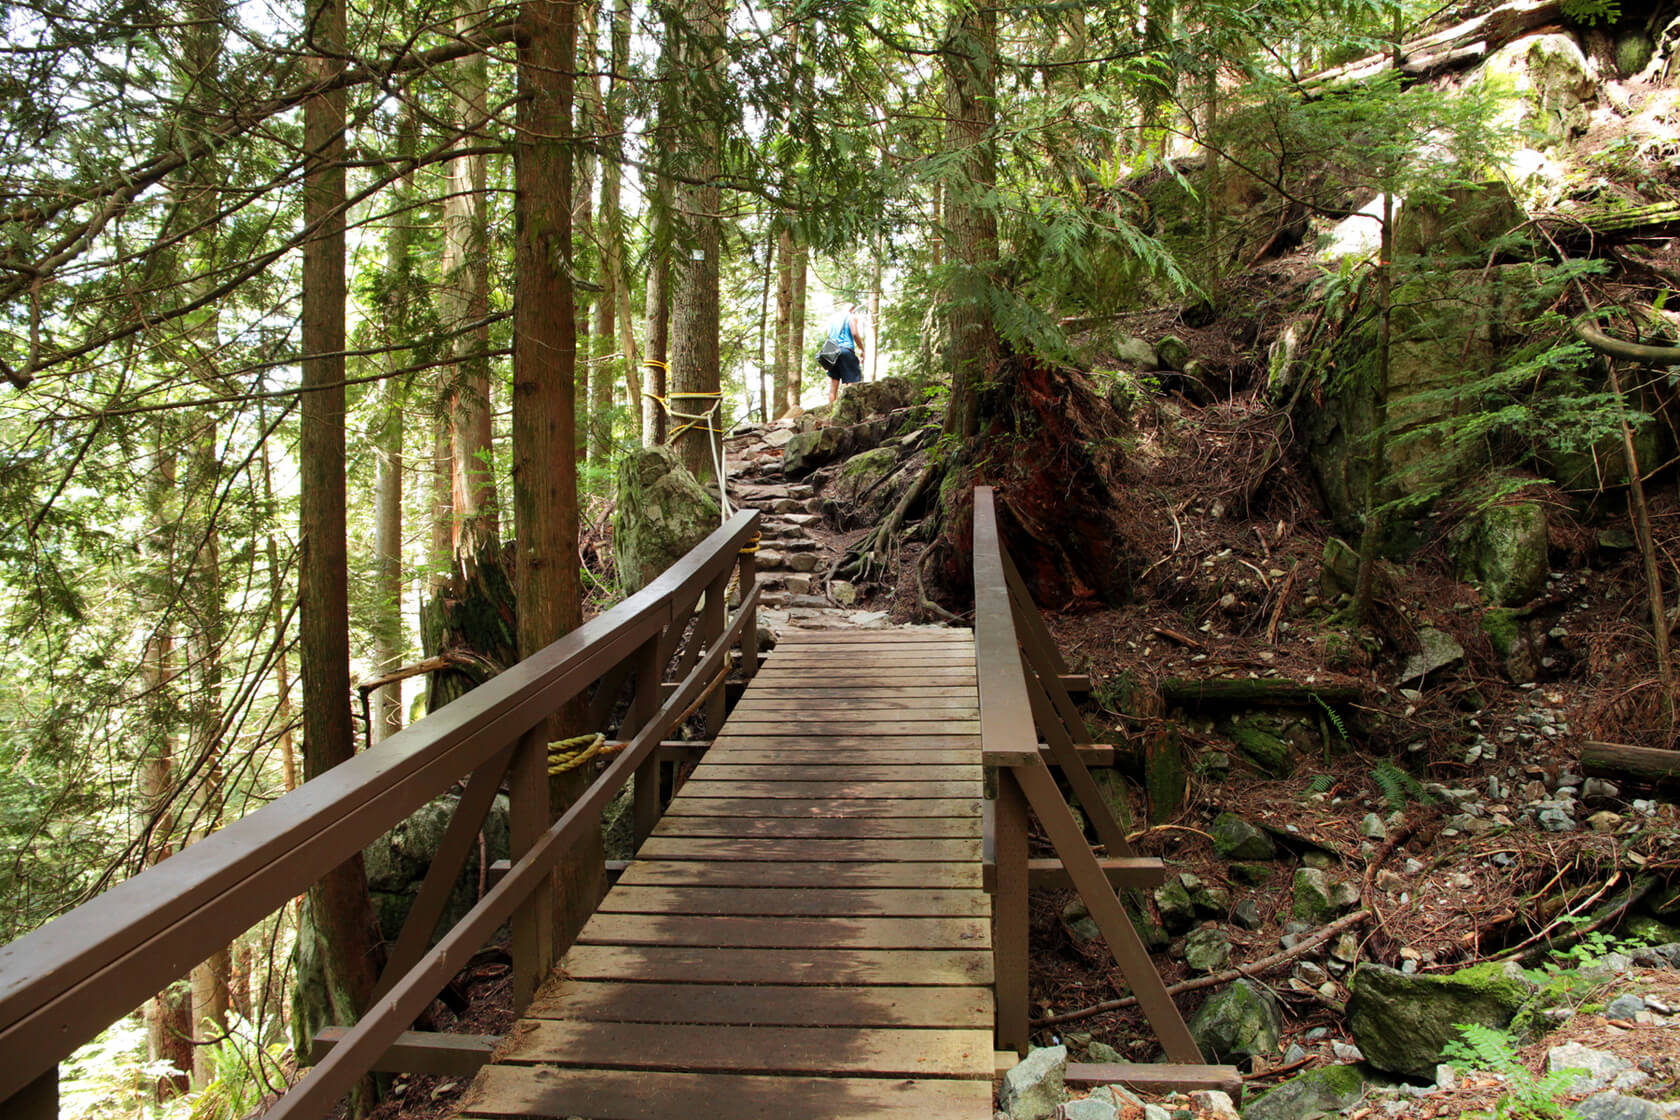 "Hiking up Grouse Mountain near Vancouver, British Columbia, Canada. Some parts of the path have stairs nailed to the roots of trees."